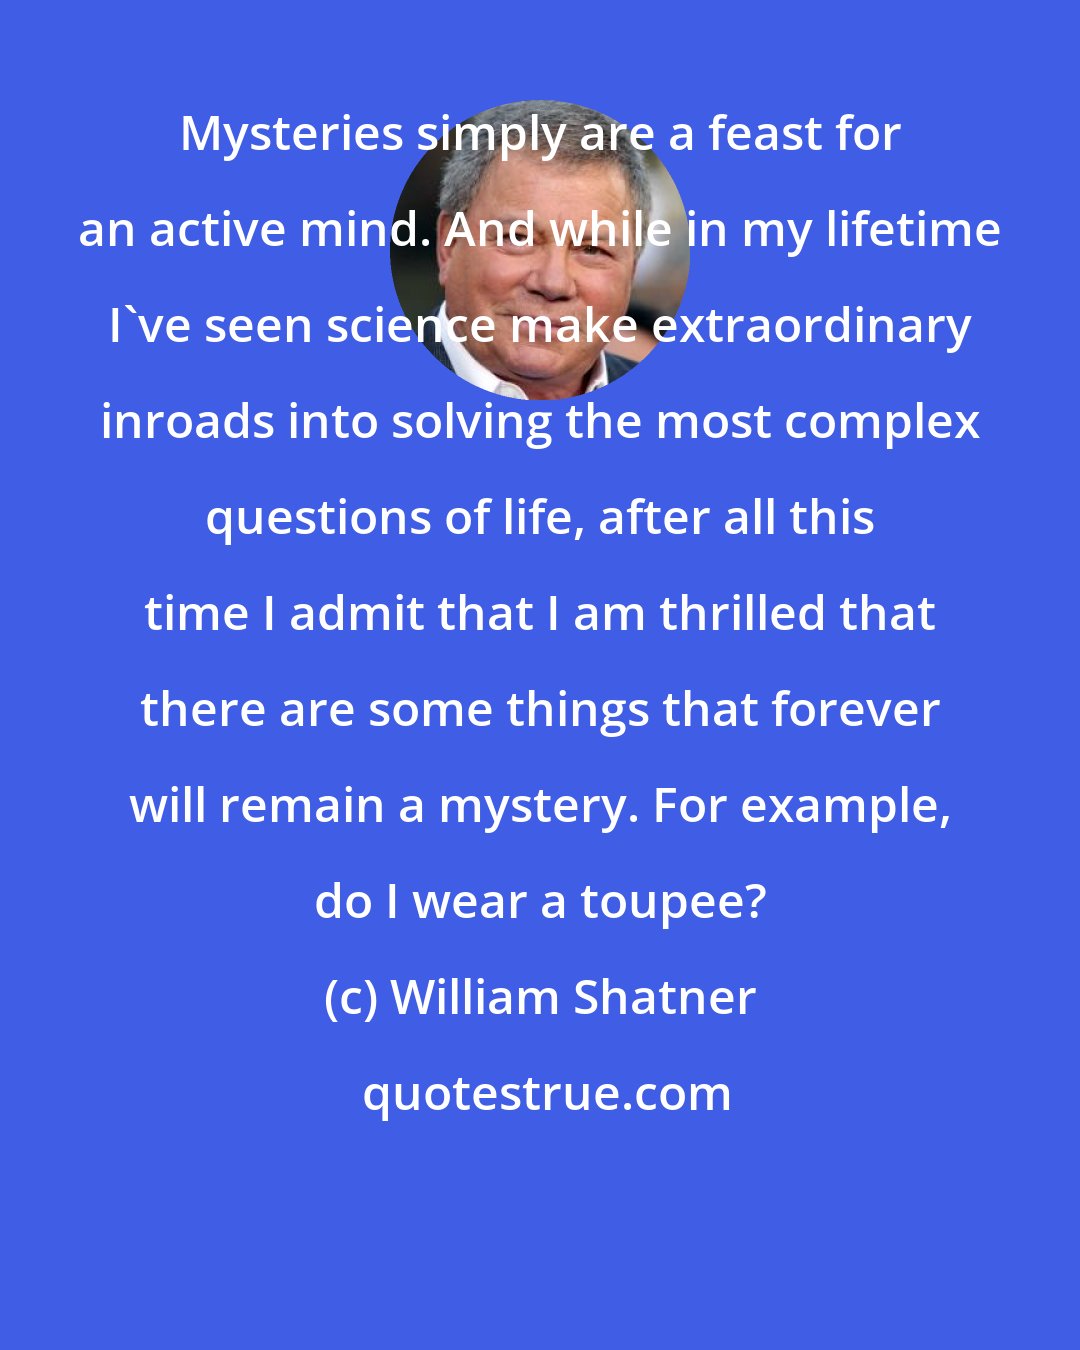 William Shatner: Mysteries simply are a feast for an active mind. And while in my lifetime I've seen science make extraordinary inroads into solving the most complex questions of life, after all this time I admit that I am thrilled that there are some things that forever will remain a mystery. For example, do I wear a toupee?